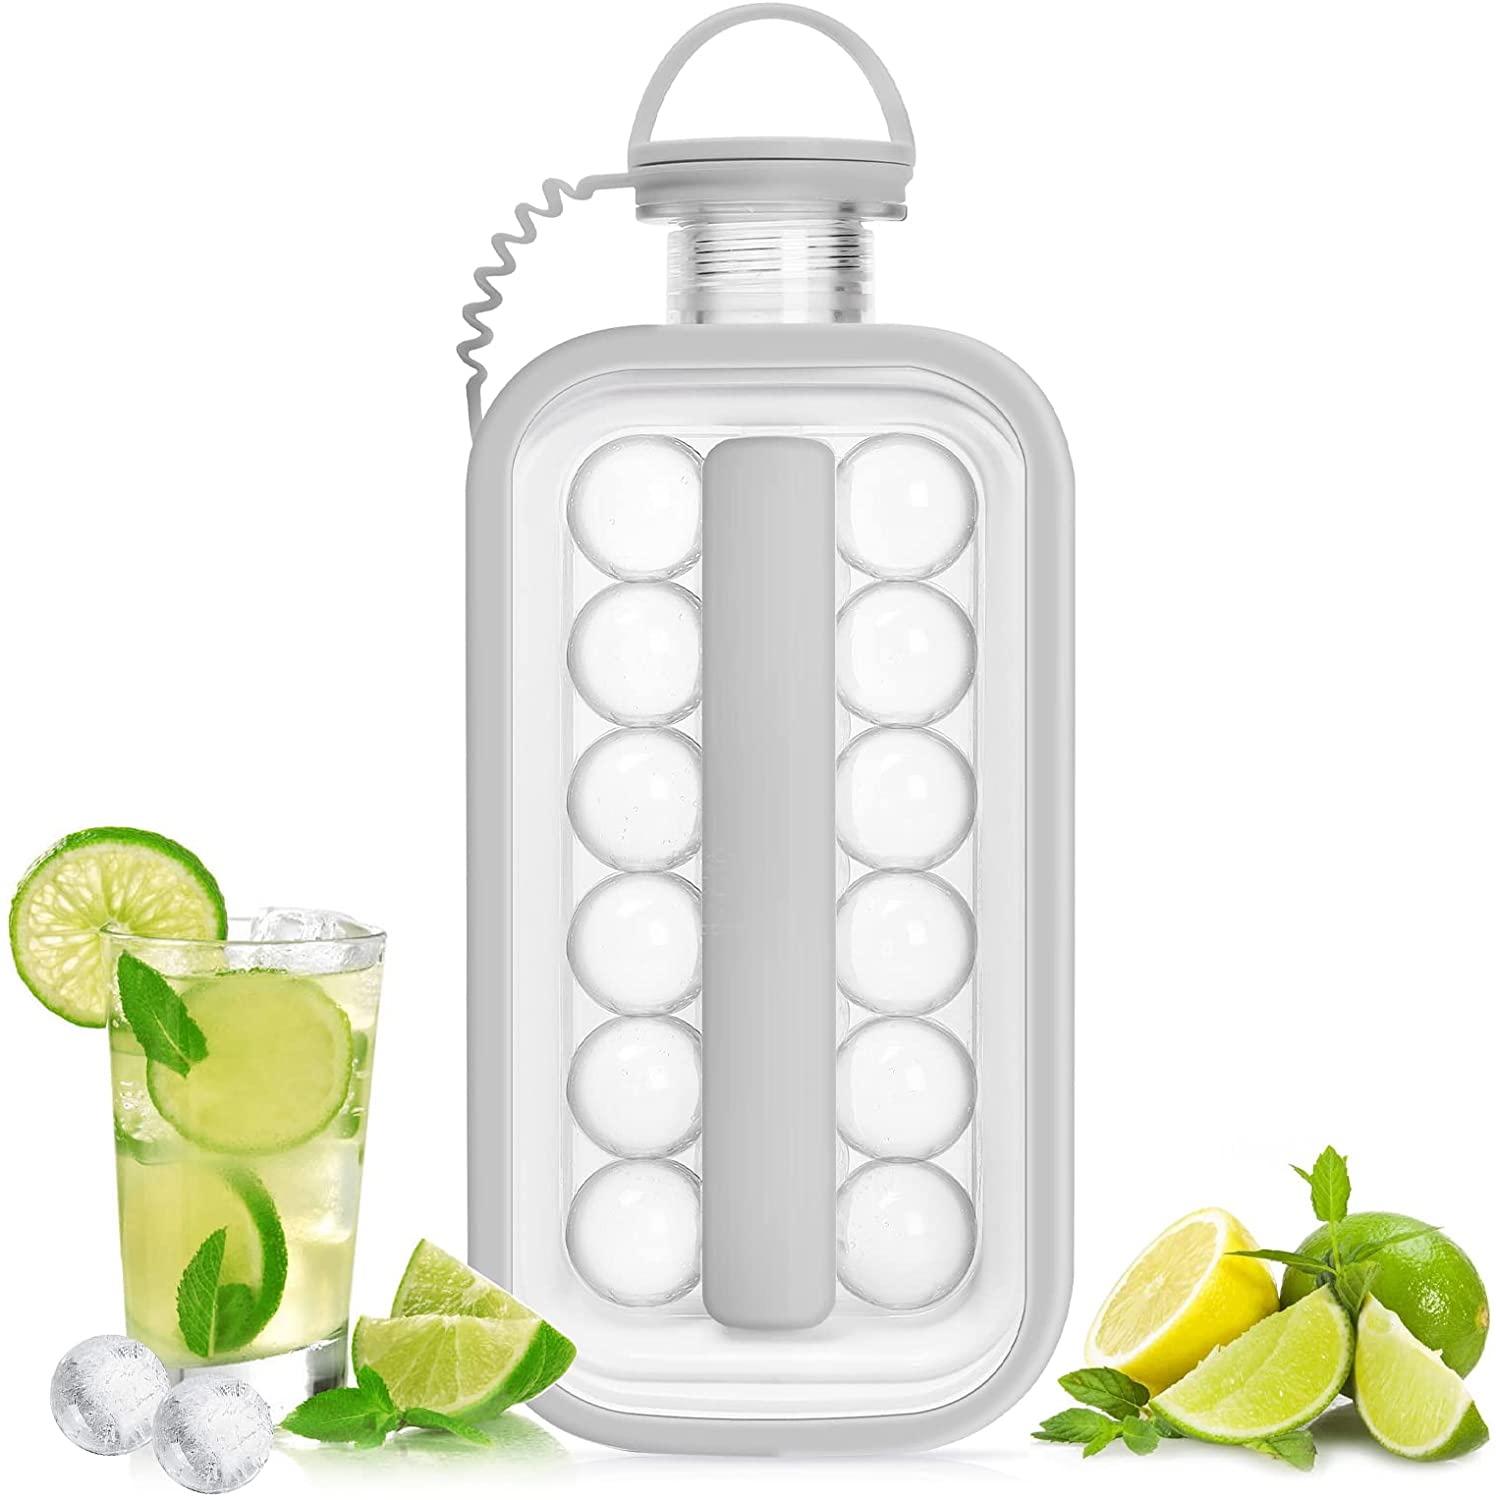 ALSOMTEC Portable Ice Ball Maker Sanitary Ice Cube Tray for